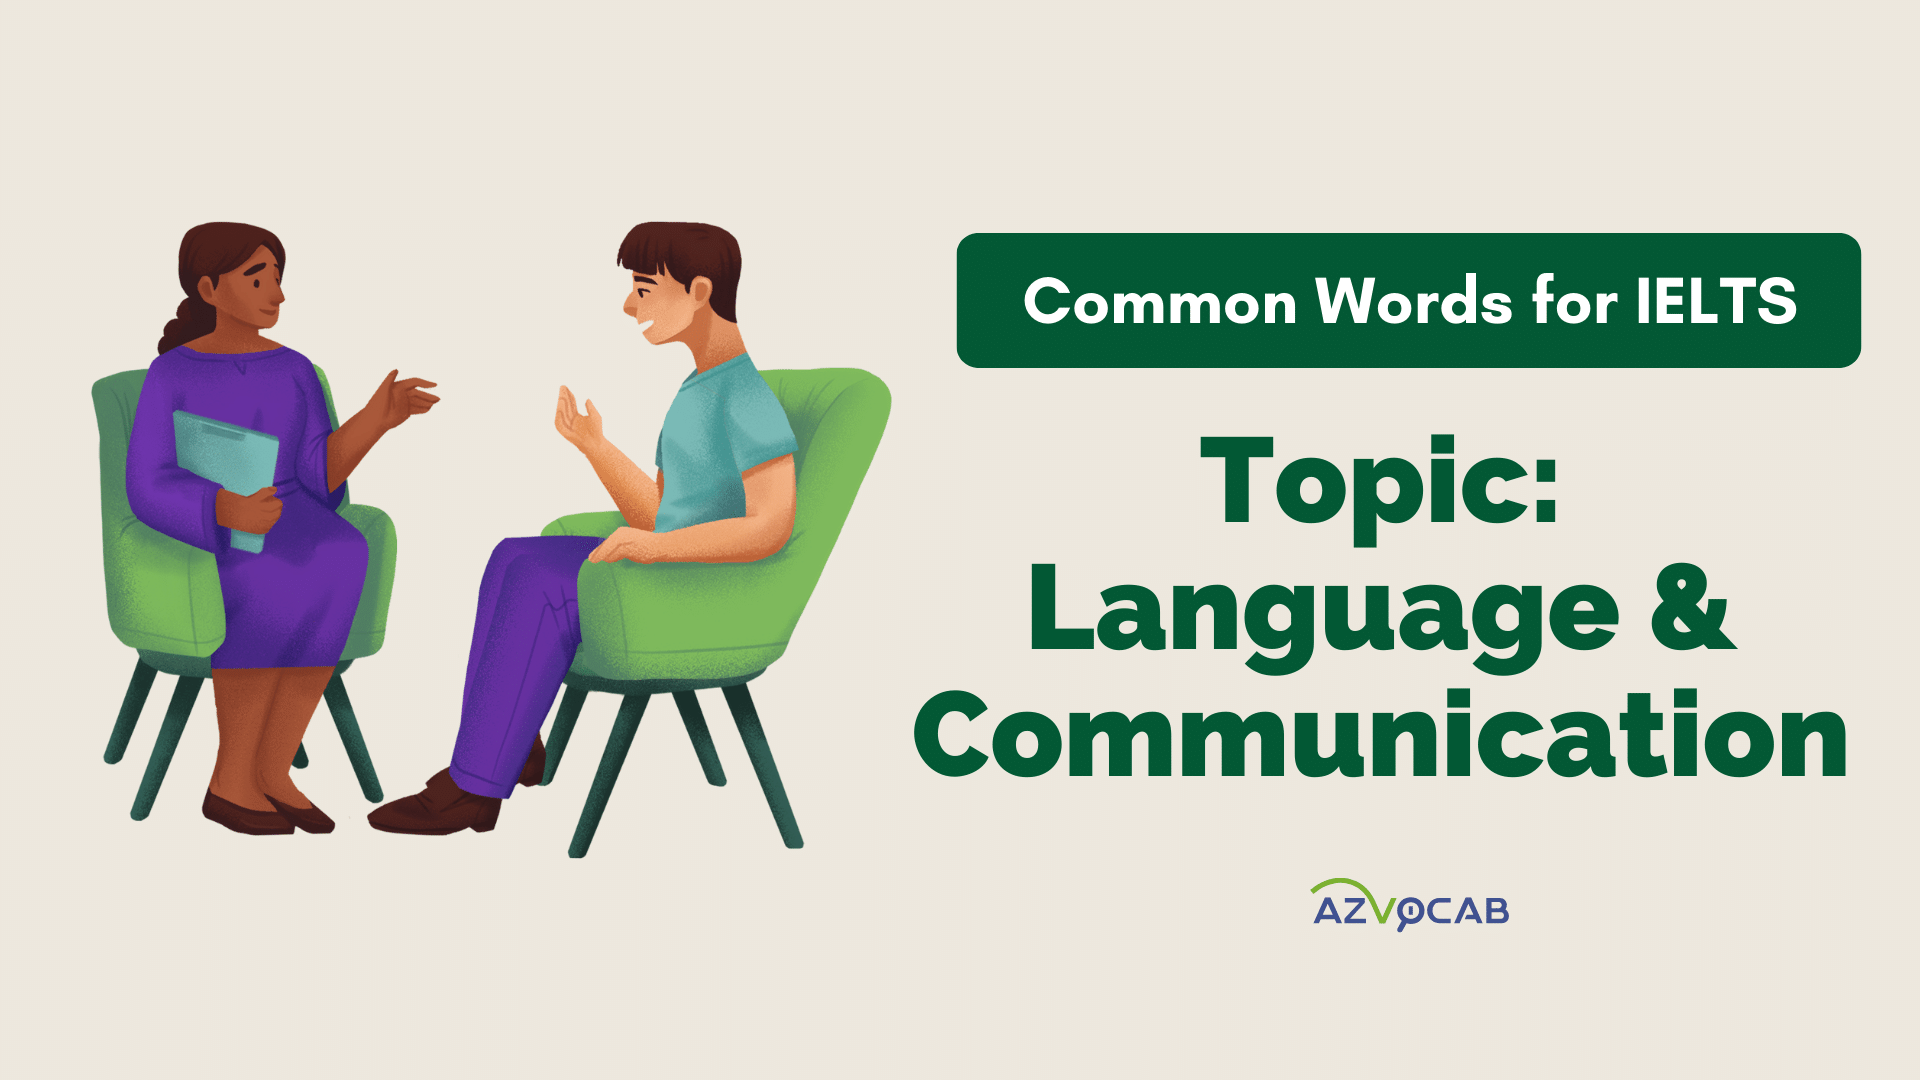 Vocabulary for IELTS Language and Communication